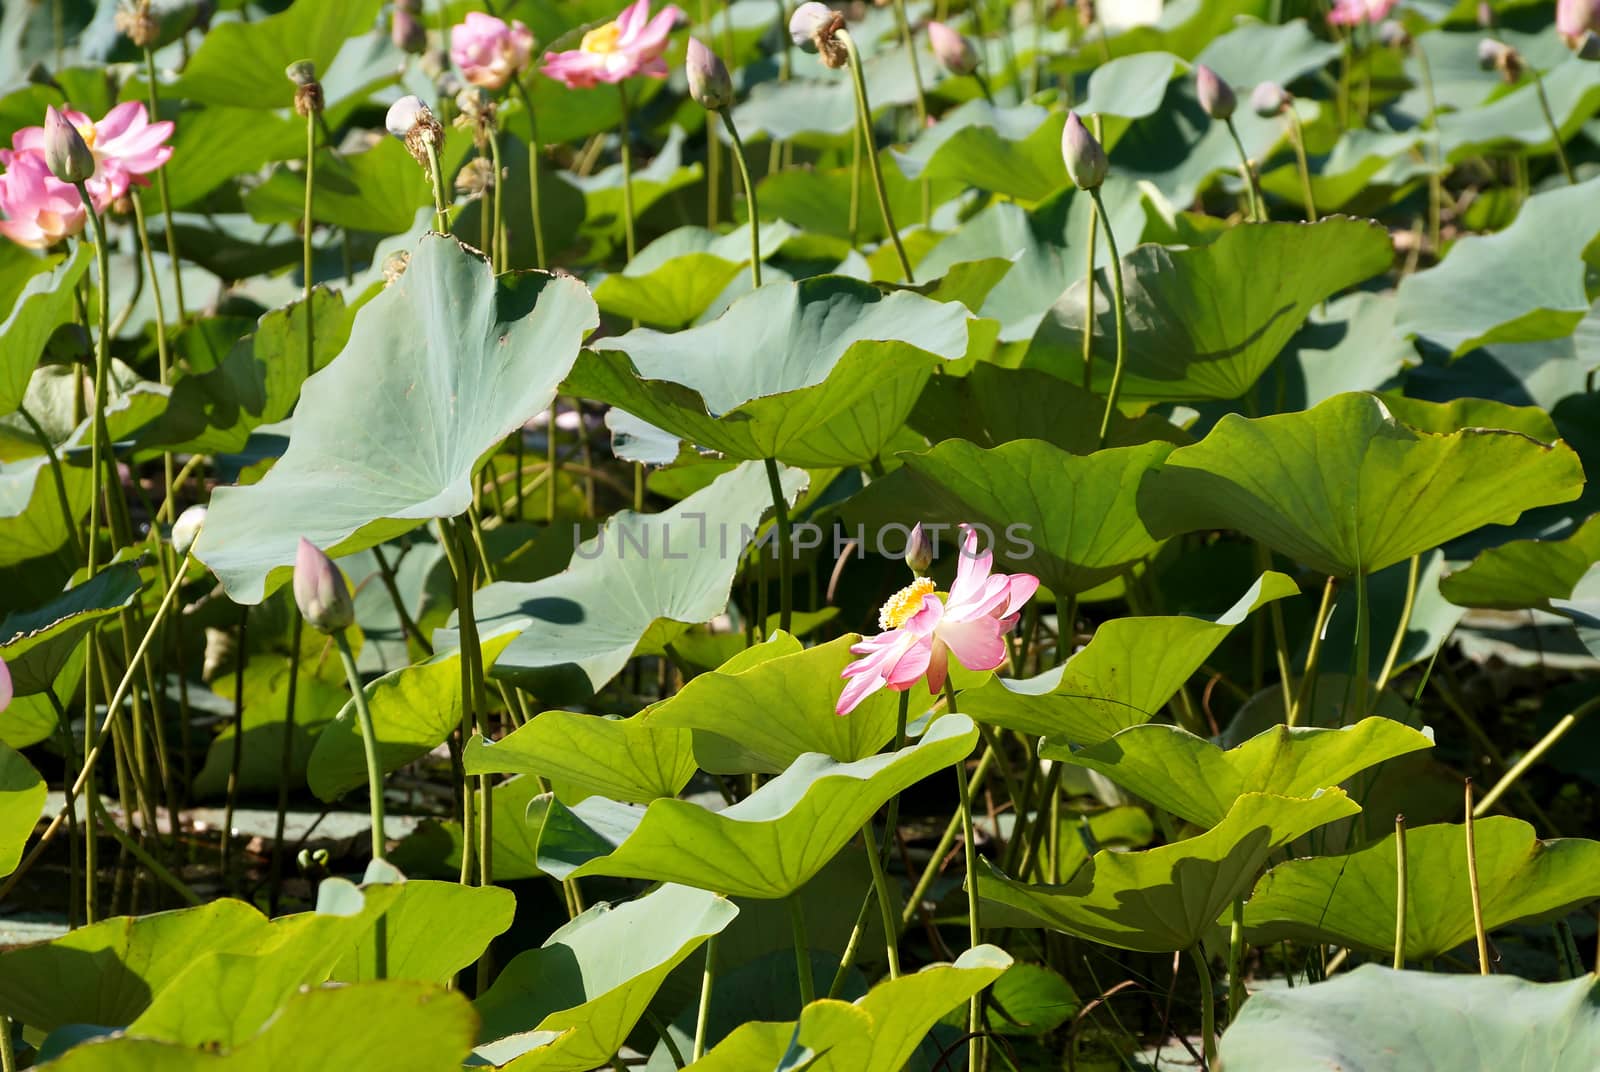 Lotus flower on the lake in a flood plain of the Volga River by Vadimdem